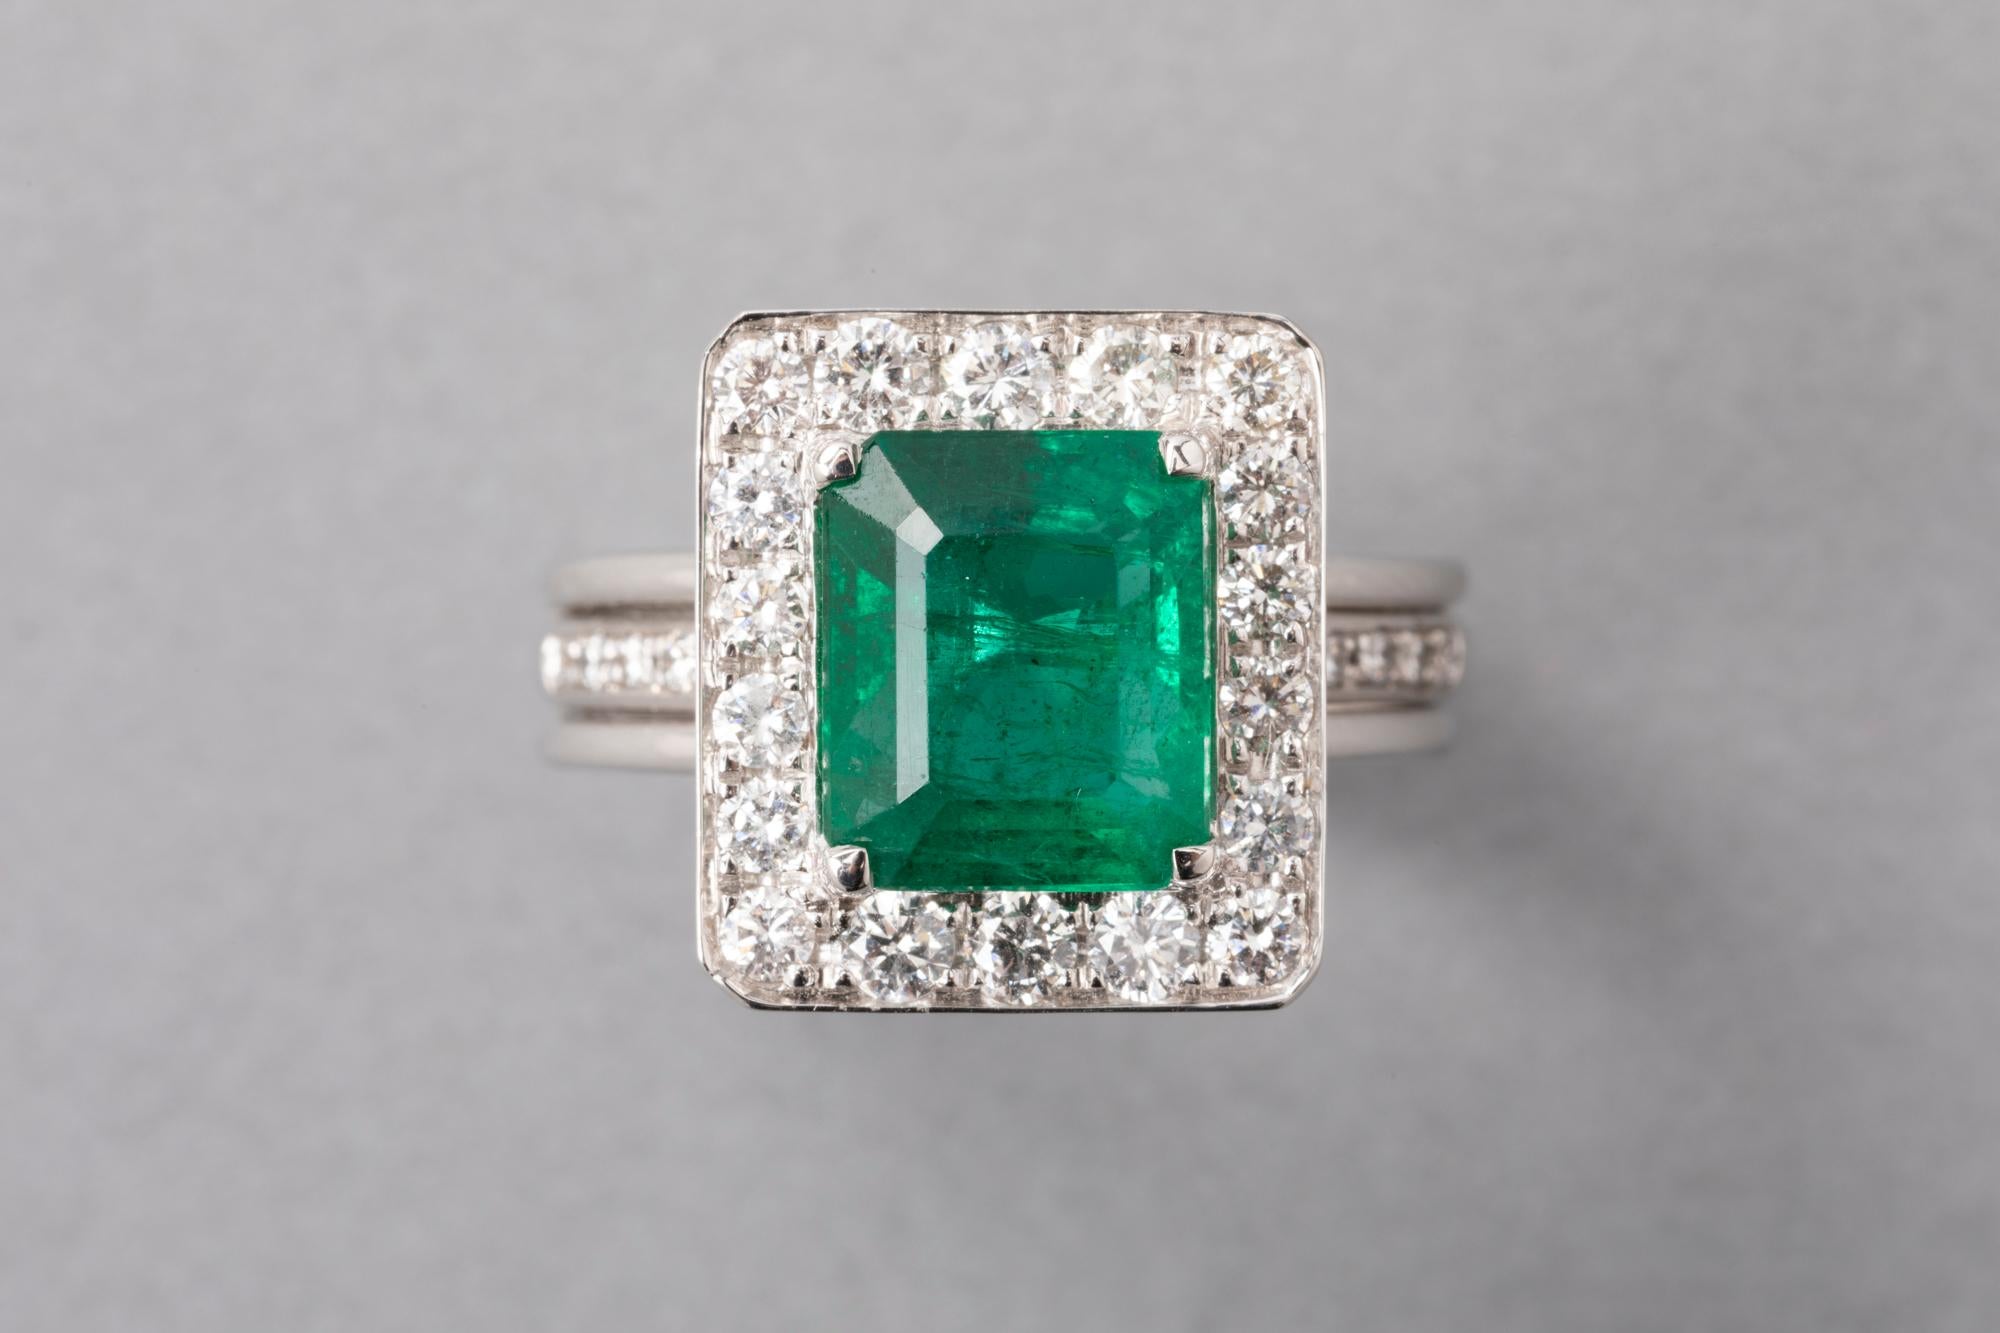 First i want to say that shipping is fully operating, i sent many packages to USA last weeks.

Very Beautiful emerald ring, made in France circa 1960. 
The emerald has a beautiful intense green colour, good clarity for an emerald. 
Mounted in white